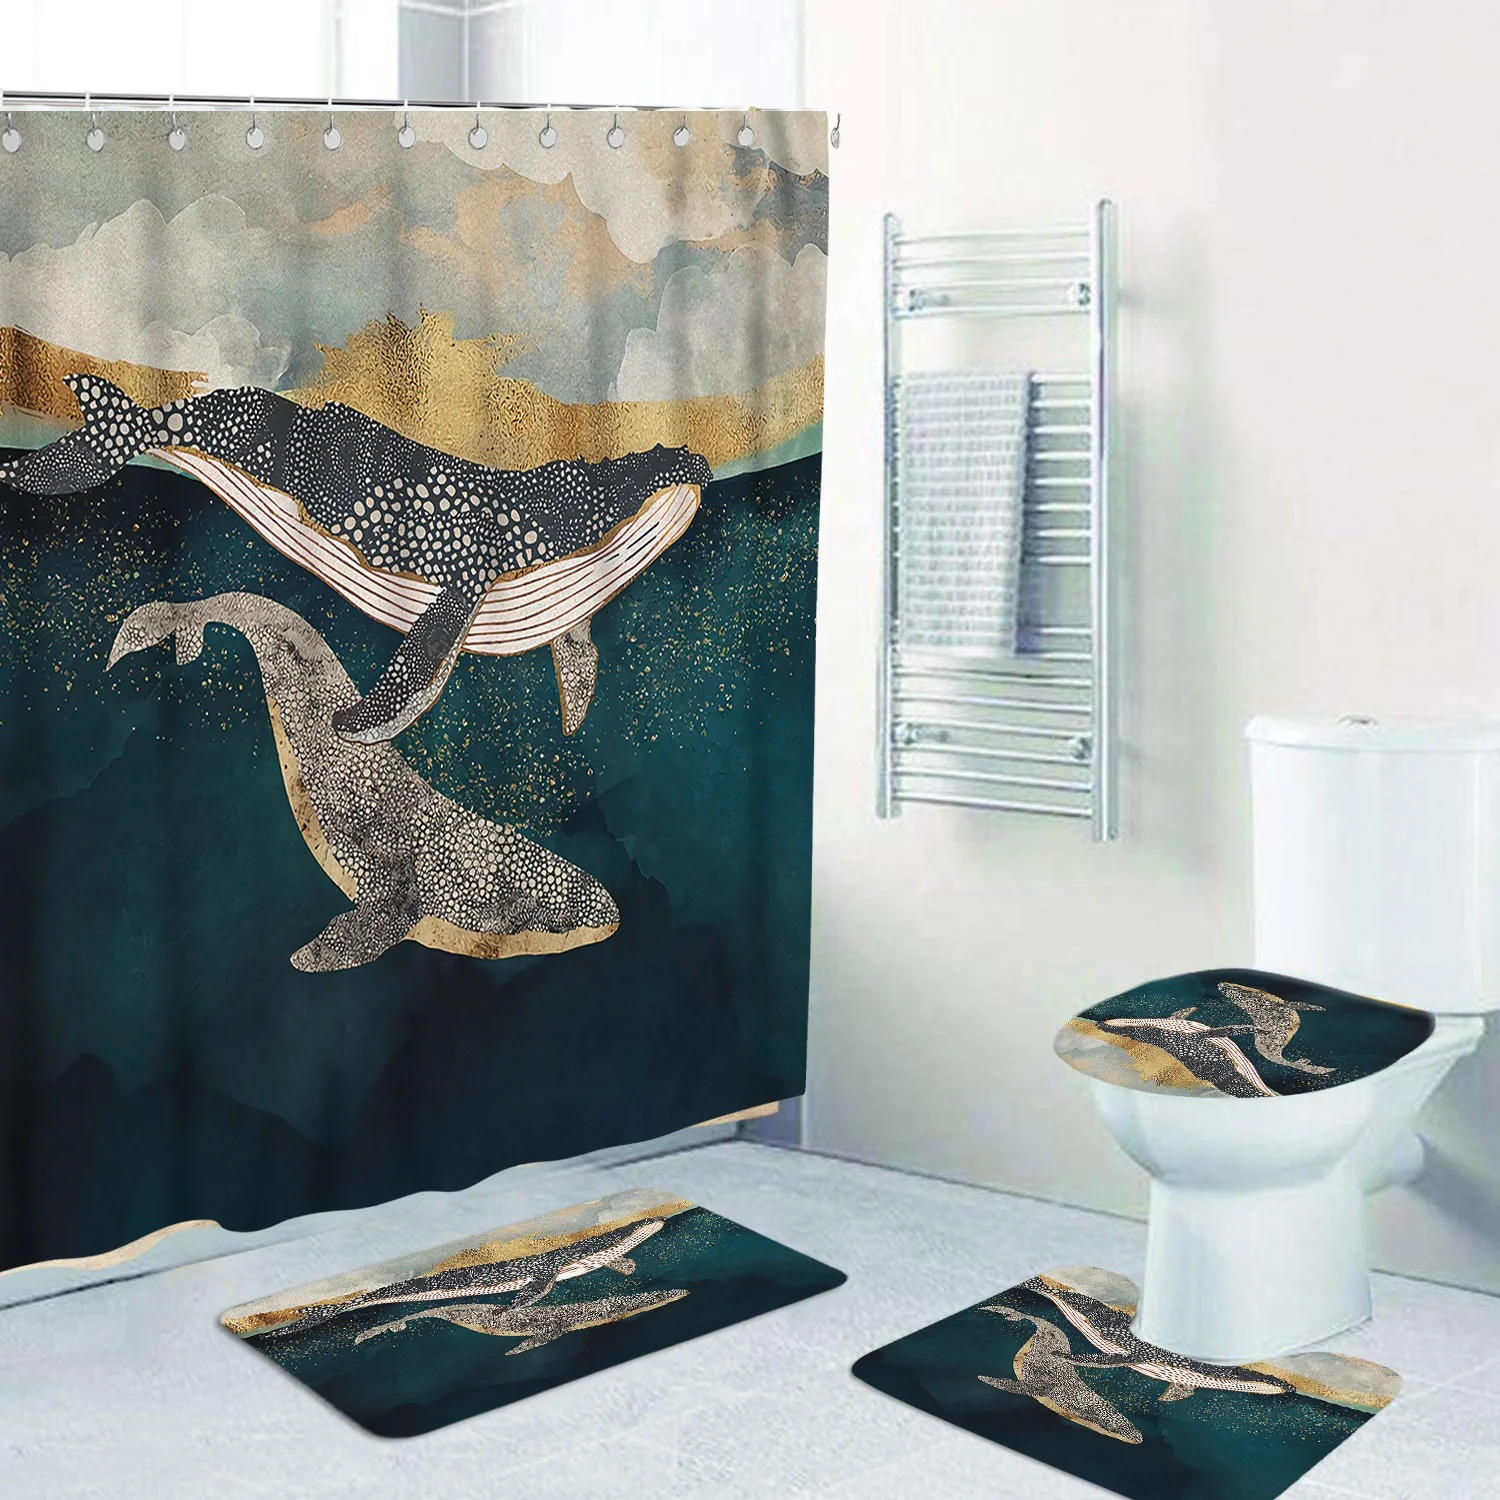 

Printed Waterproof Sets with Shower Curtain and Rugs Wholesale Bathroom 3D 4 Piece Bathroom Floor Rug Bath Mat PVC Customized